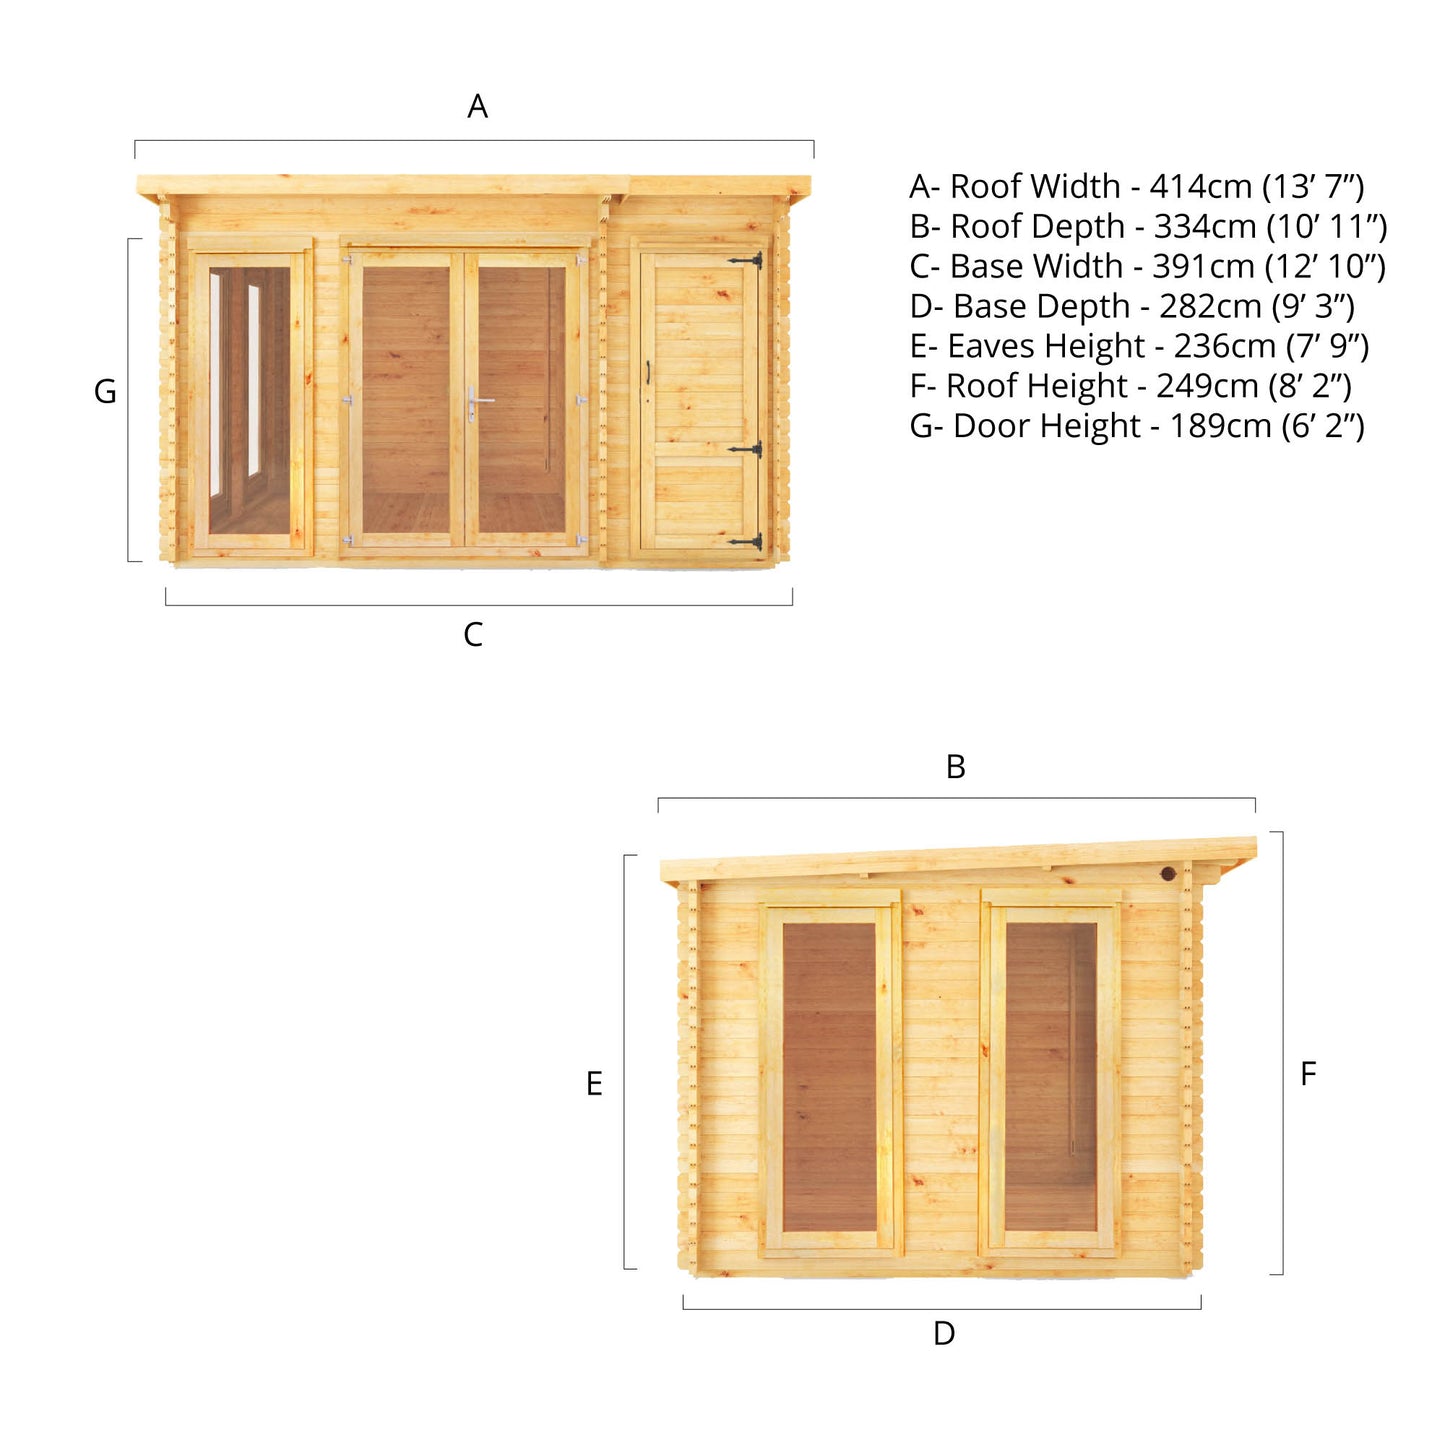 The 4.1m x 3m Wren Pent Log Cabin with Side Shed